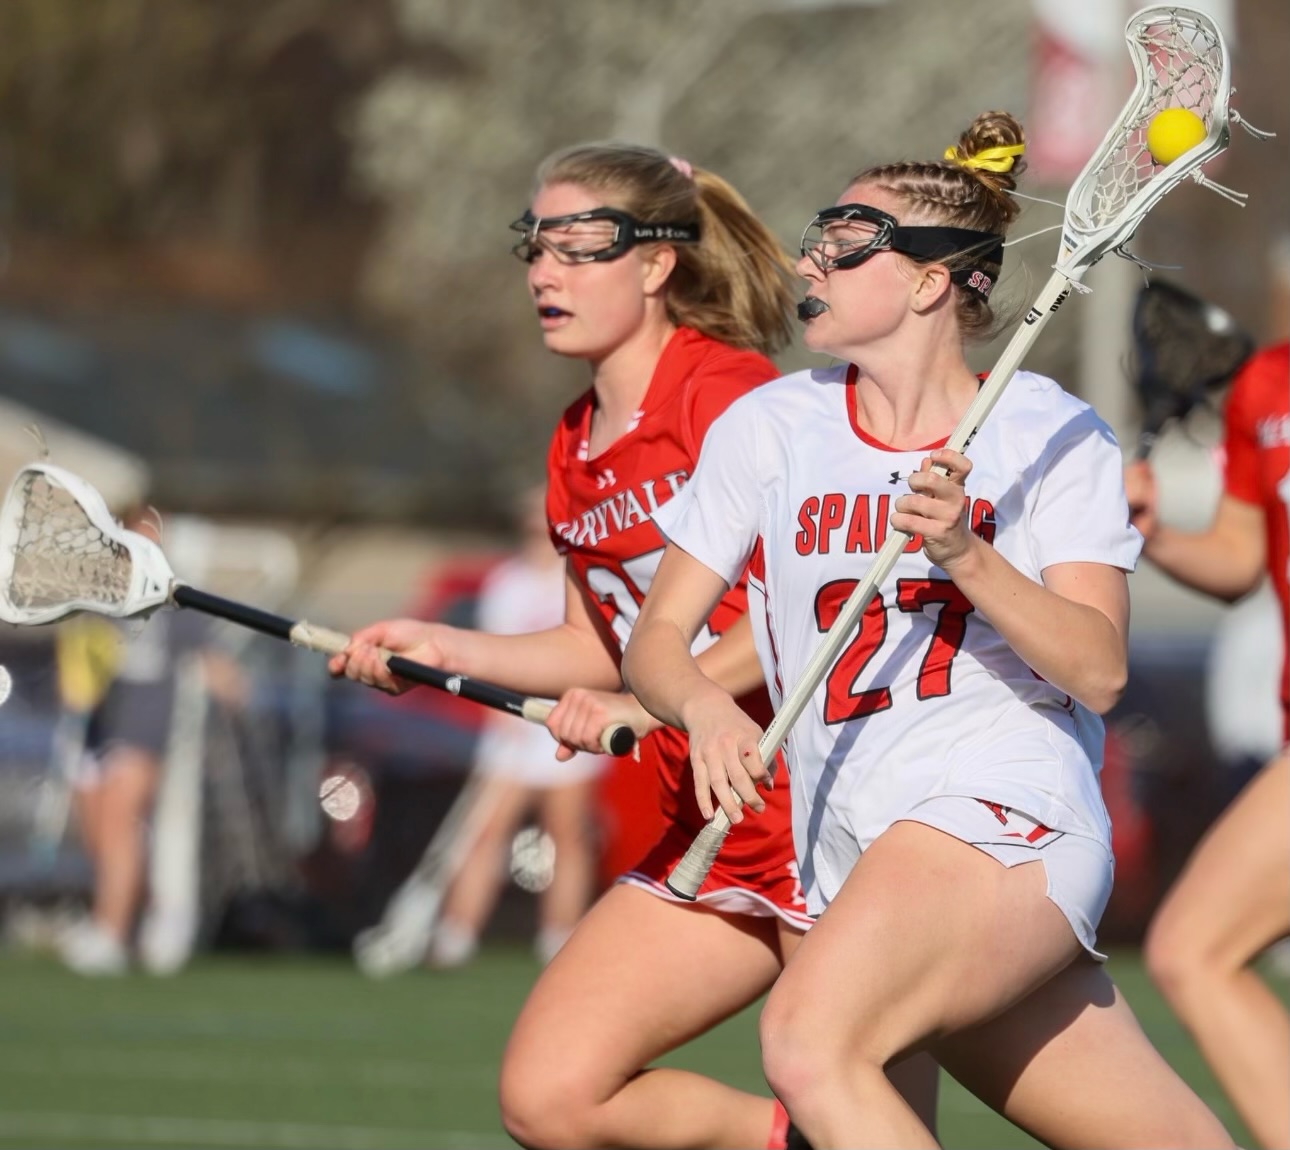 Archbishop Spalding opens the A Conference lacrosse season on a hot streak